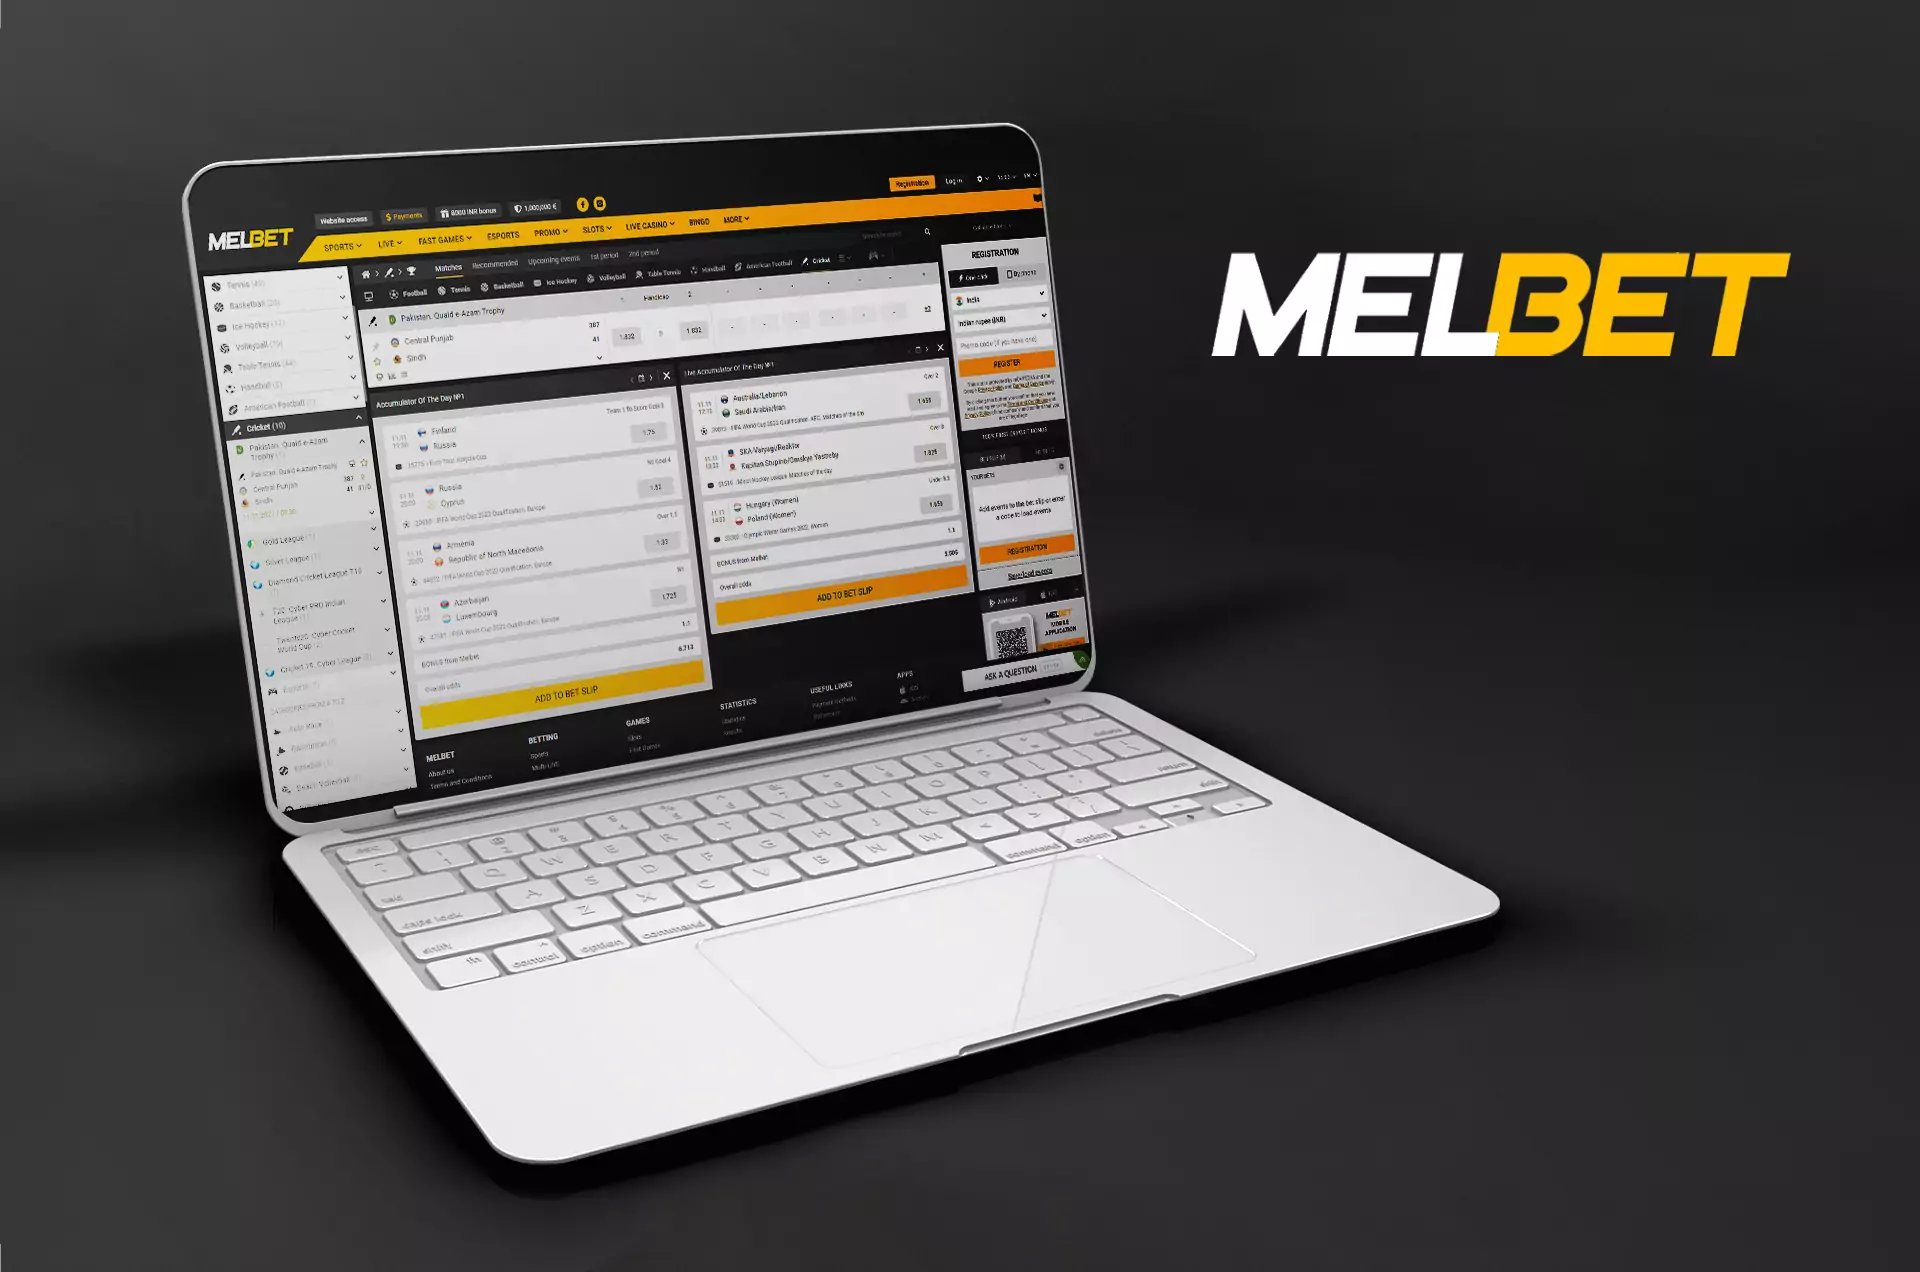 Melbet works under the Curacao license and accepts bets from Bangladeshi users.